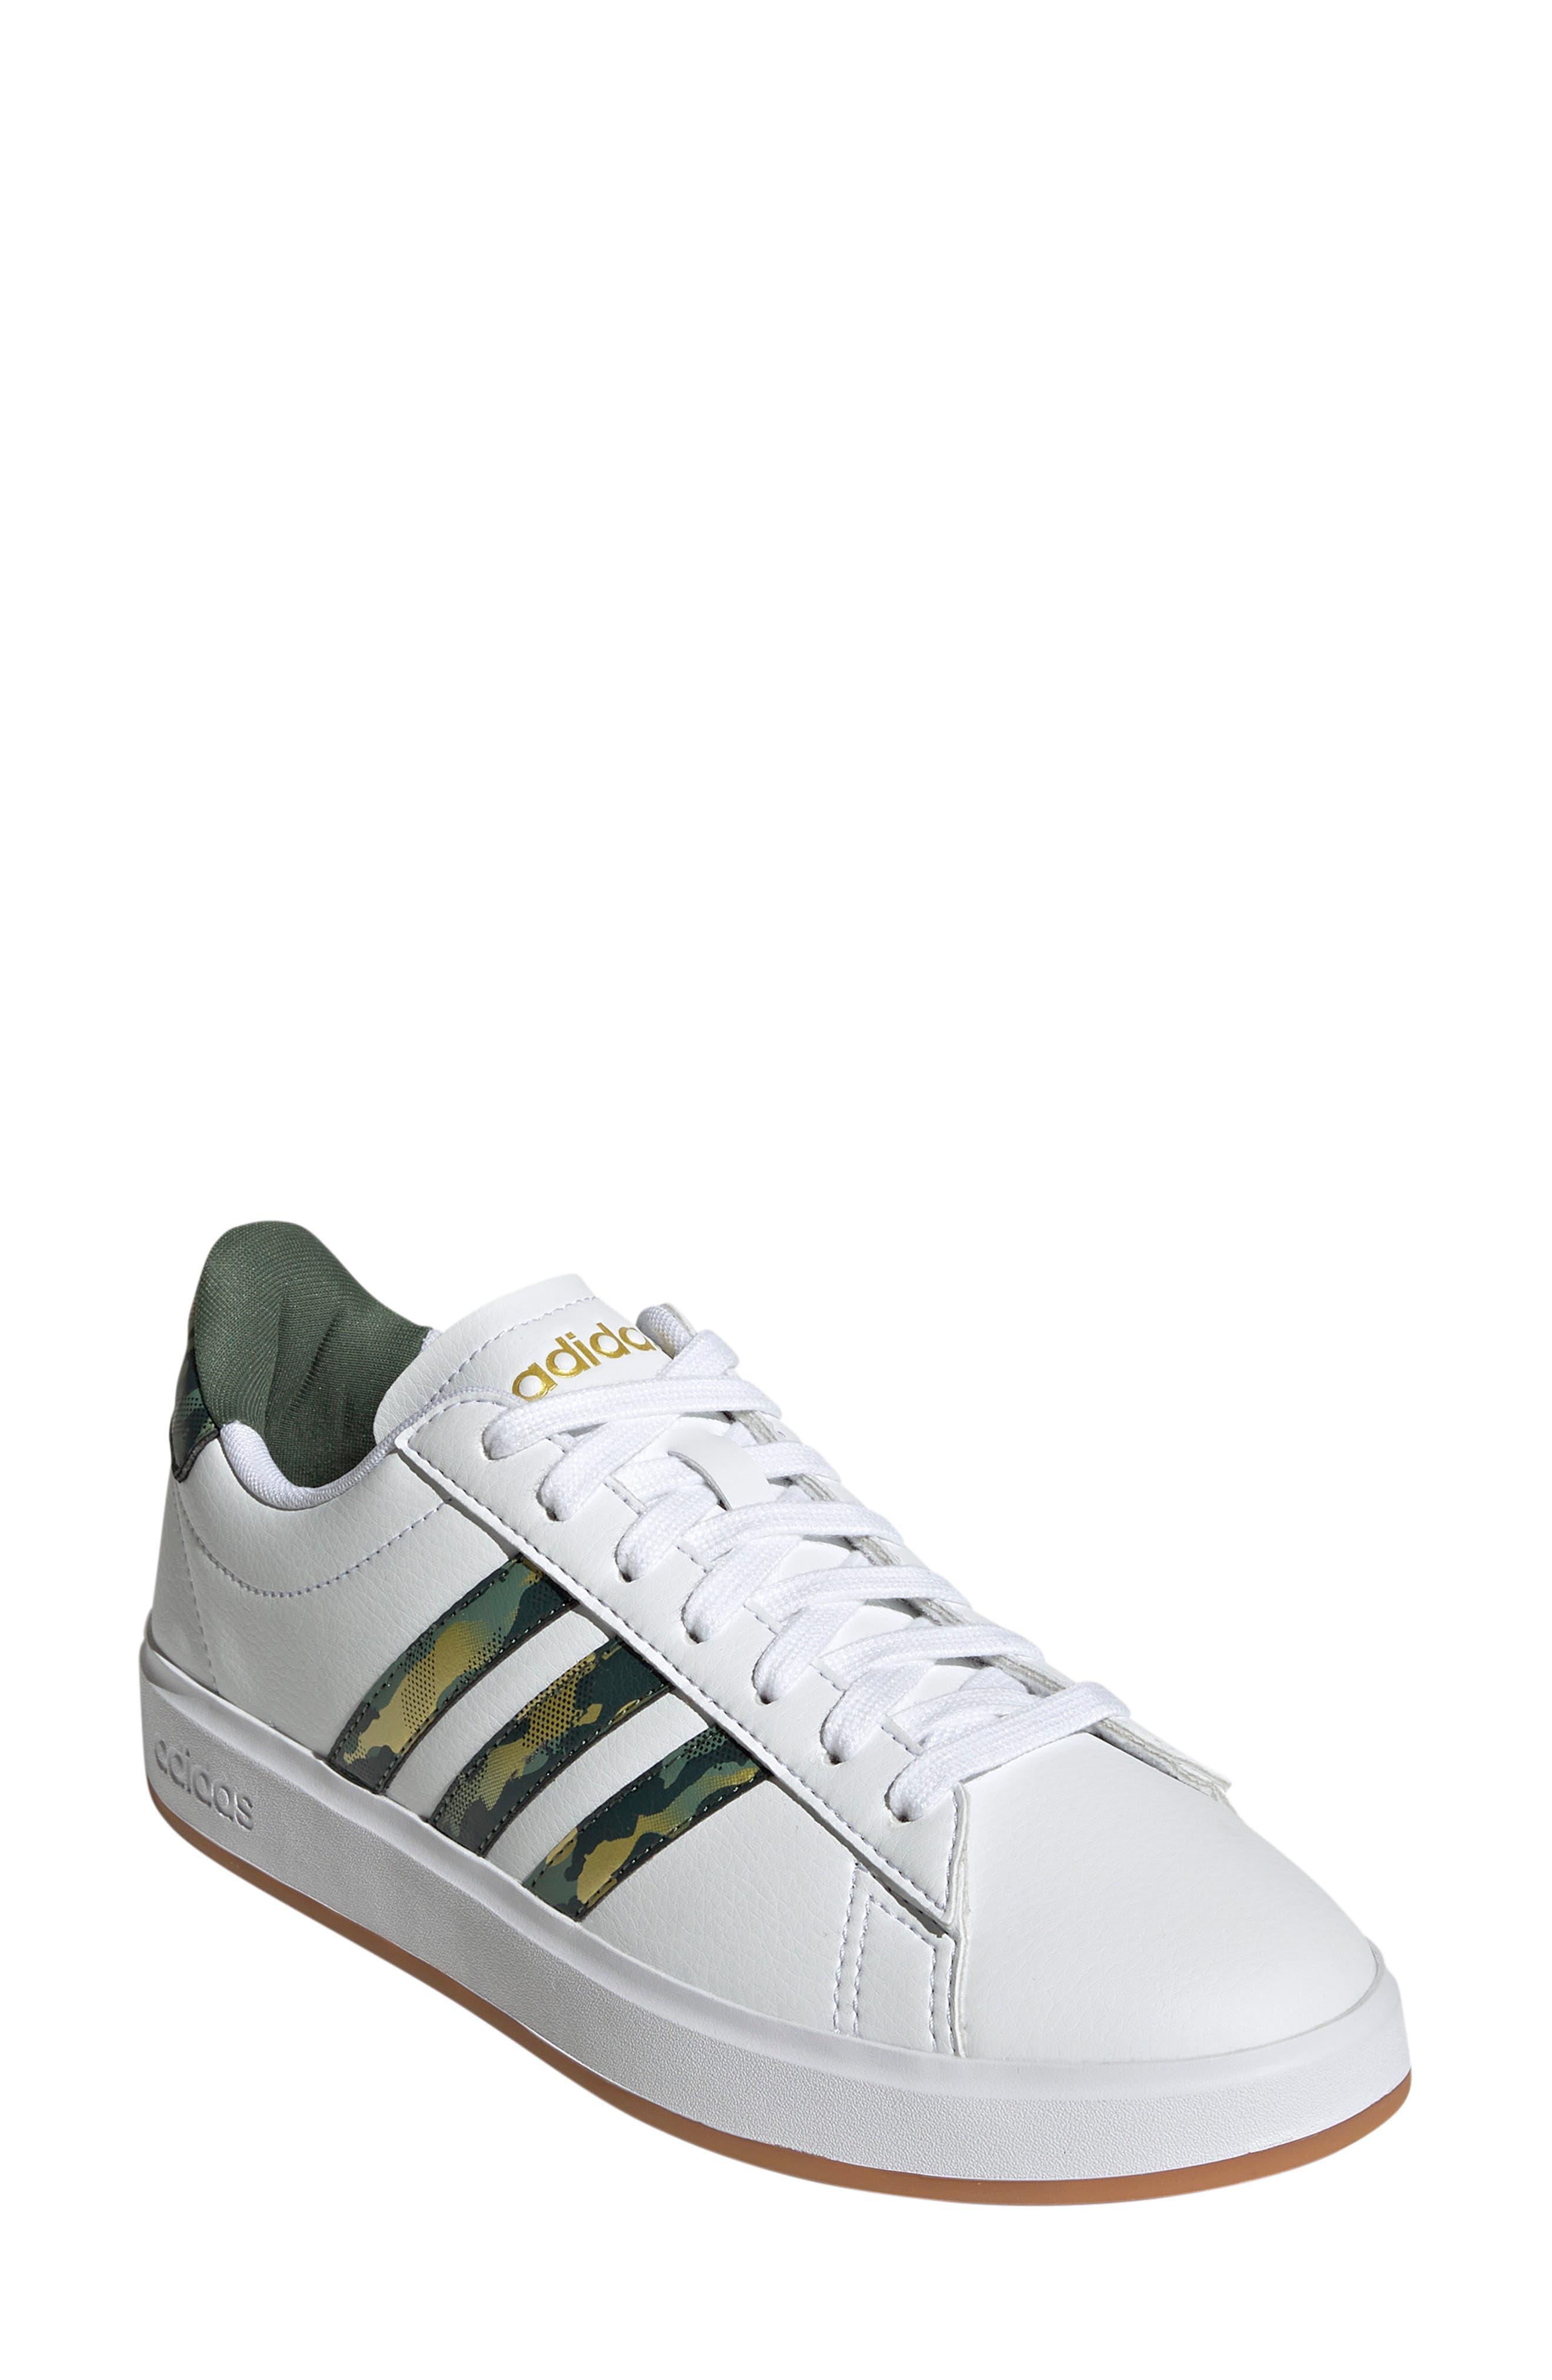 adidas Grand Court 2.0 Sneaker In White/green Oxide/lilac At Nordstrom Rack  | Lyst